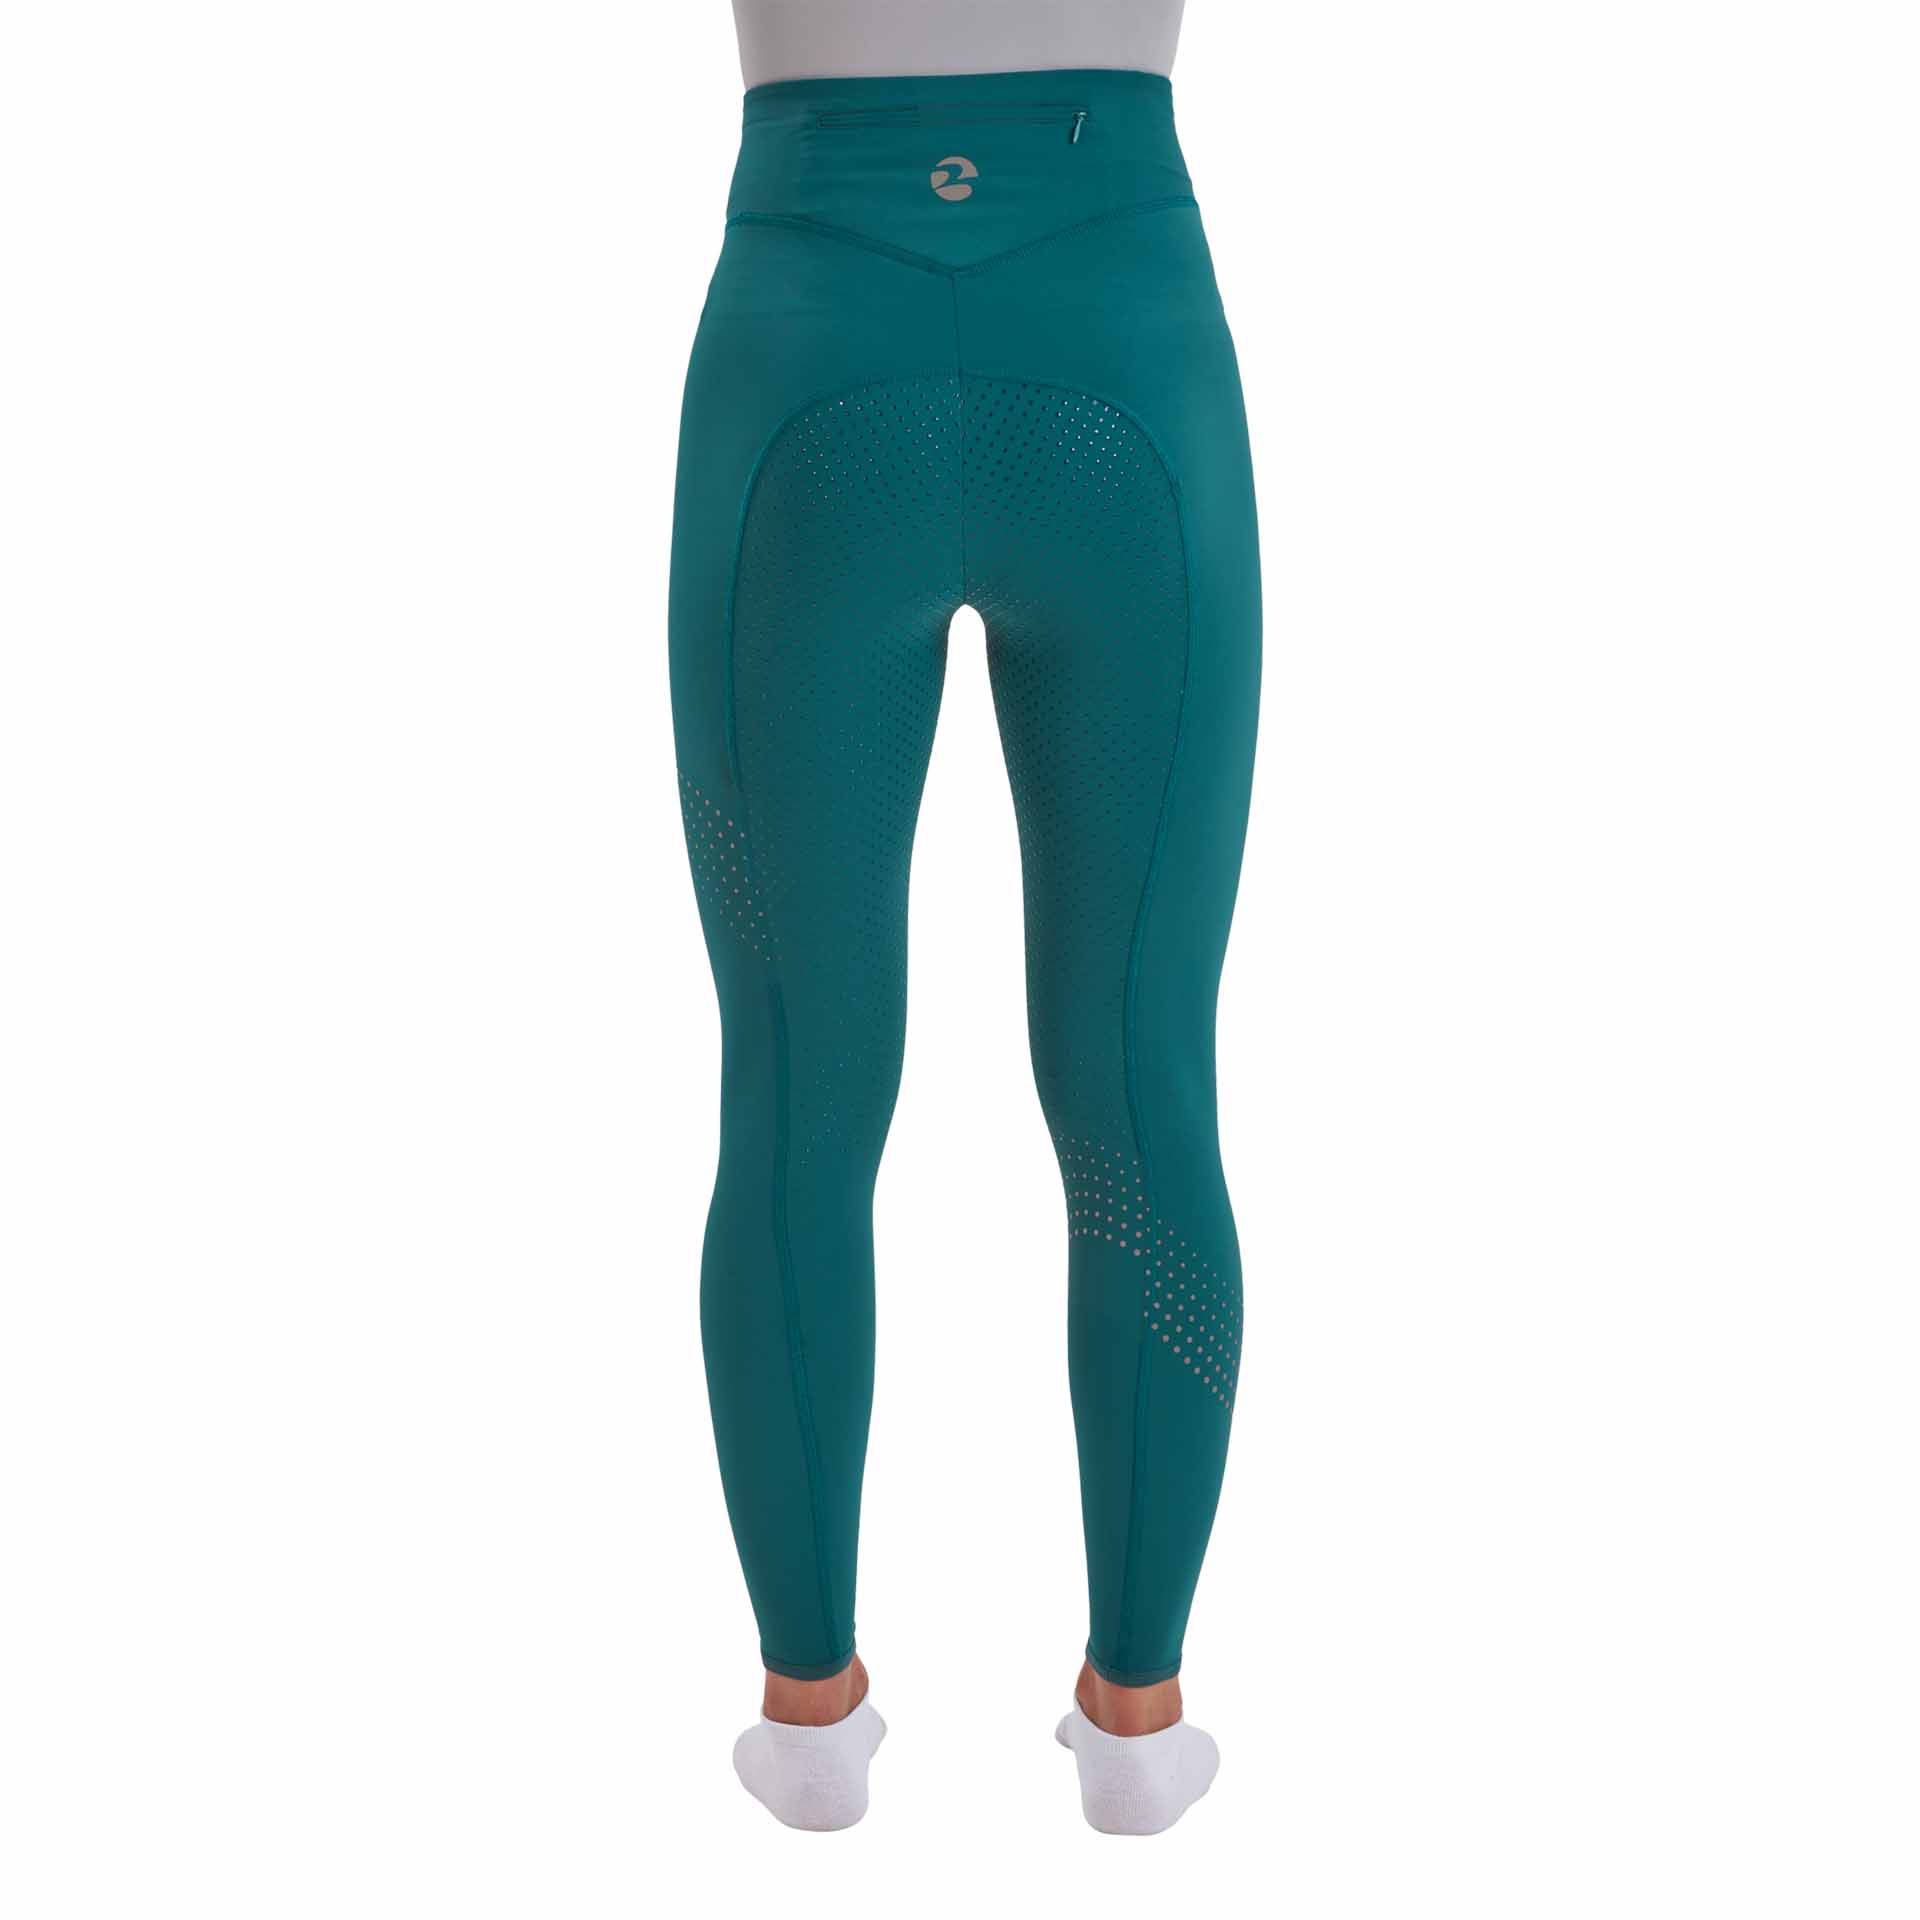 BUSSE Riding-Tights JUNE 34 teal green